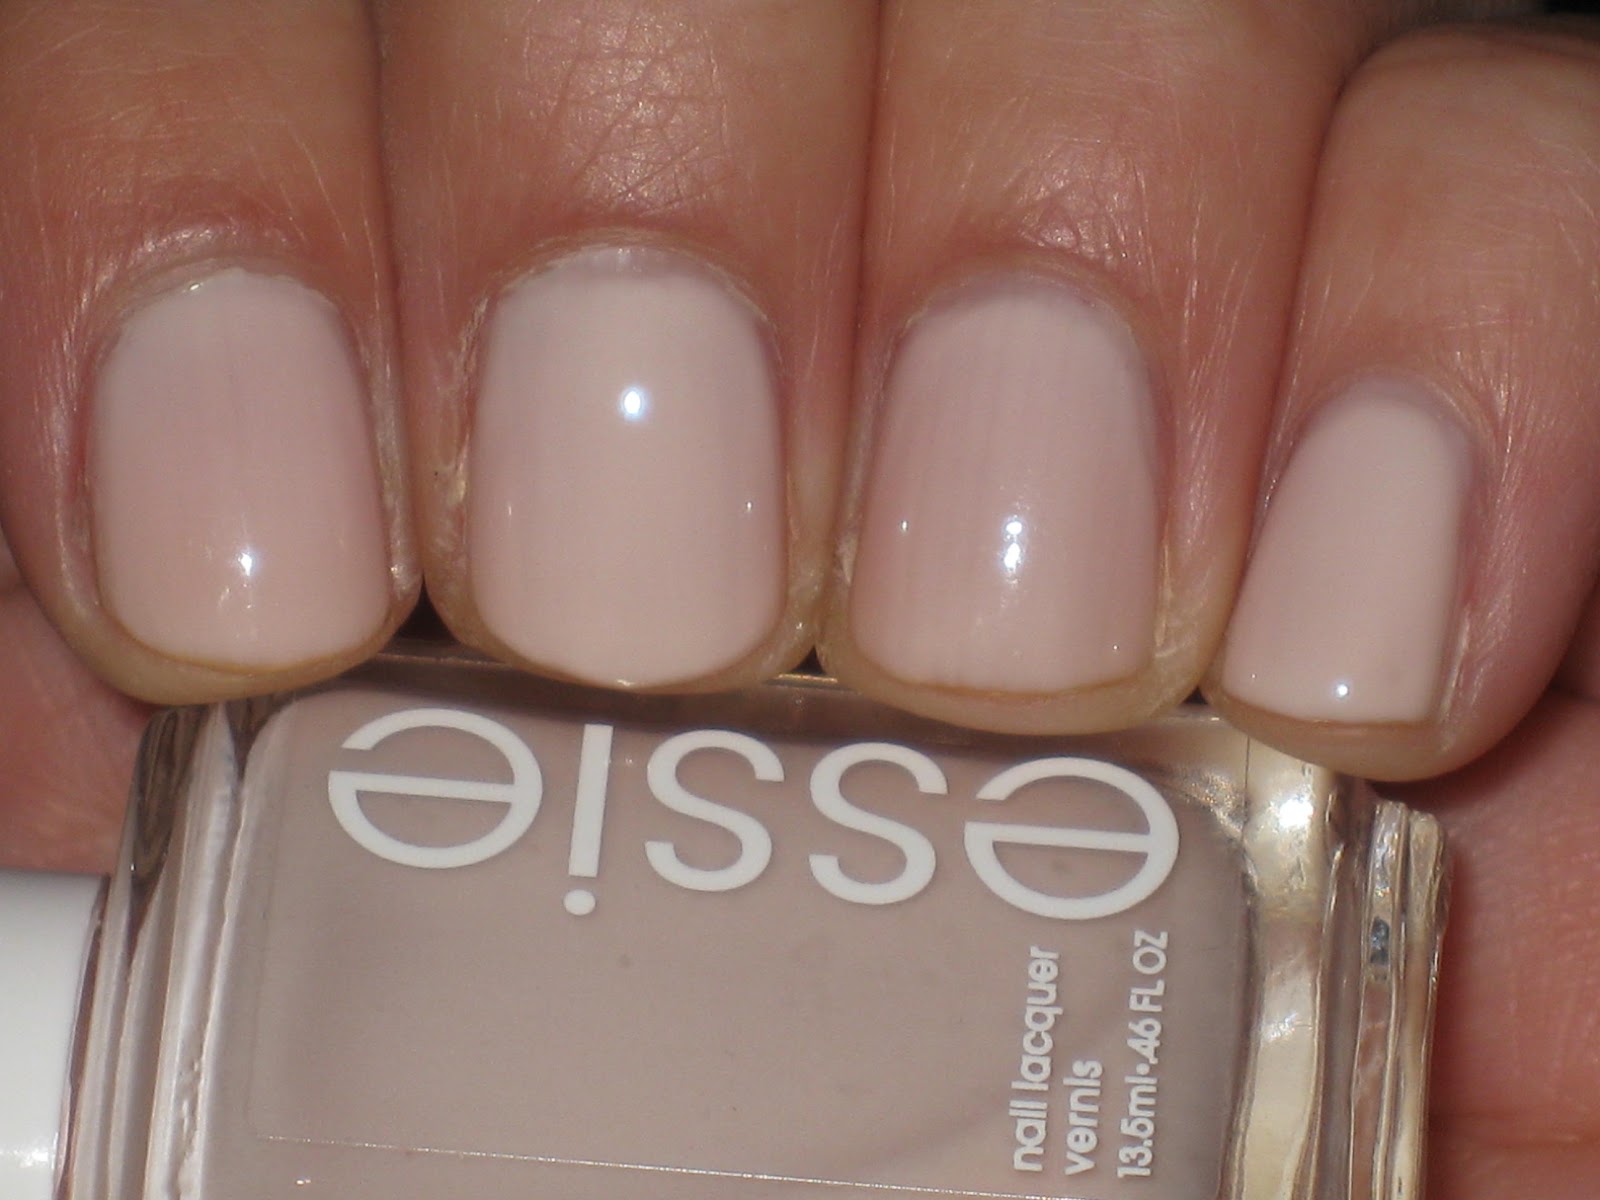 Essie Nail Polish in Ballet Slippers - wide 5